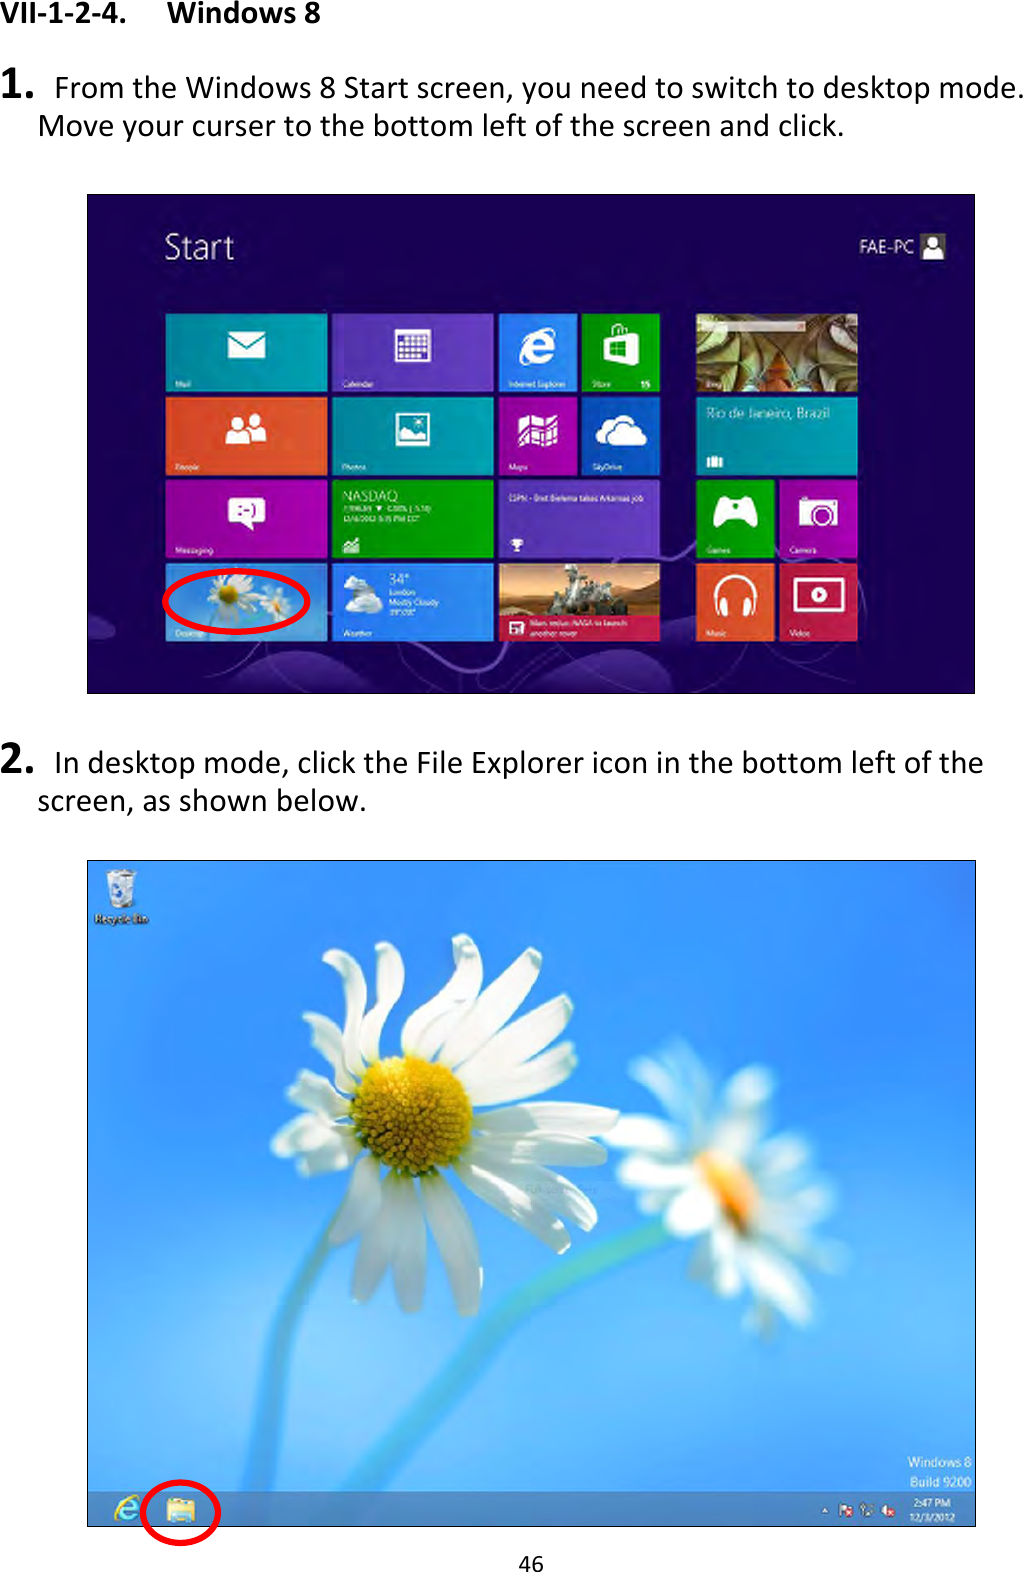 46 VII-1-2-4.    Windows 8  1.   From the Windows 8 Start screen, you need to switch to desktop mode. Move your curser to the bottom left of the screen and click.    2.   In desktop mode, click the File Explorer icon in the bottom left of the screen, as shown below.   